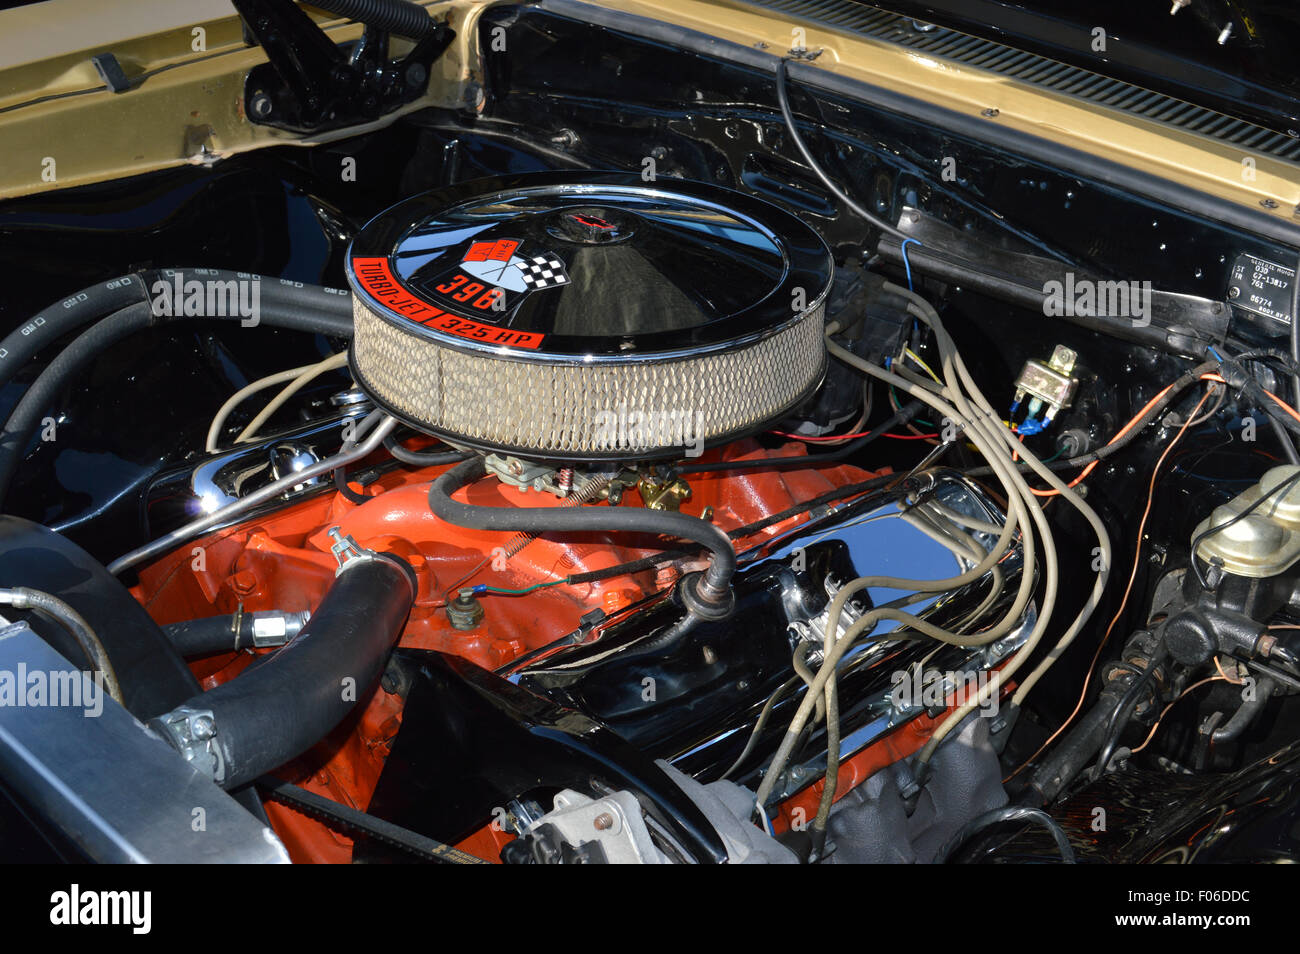 A Chevrolet 396cid Engine shown at a local car show. Stock Photo